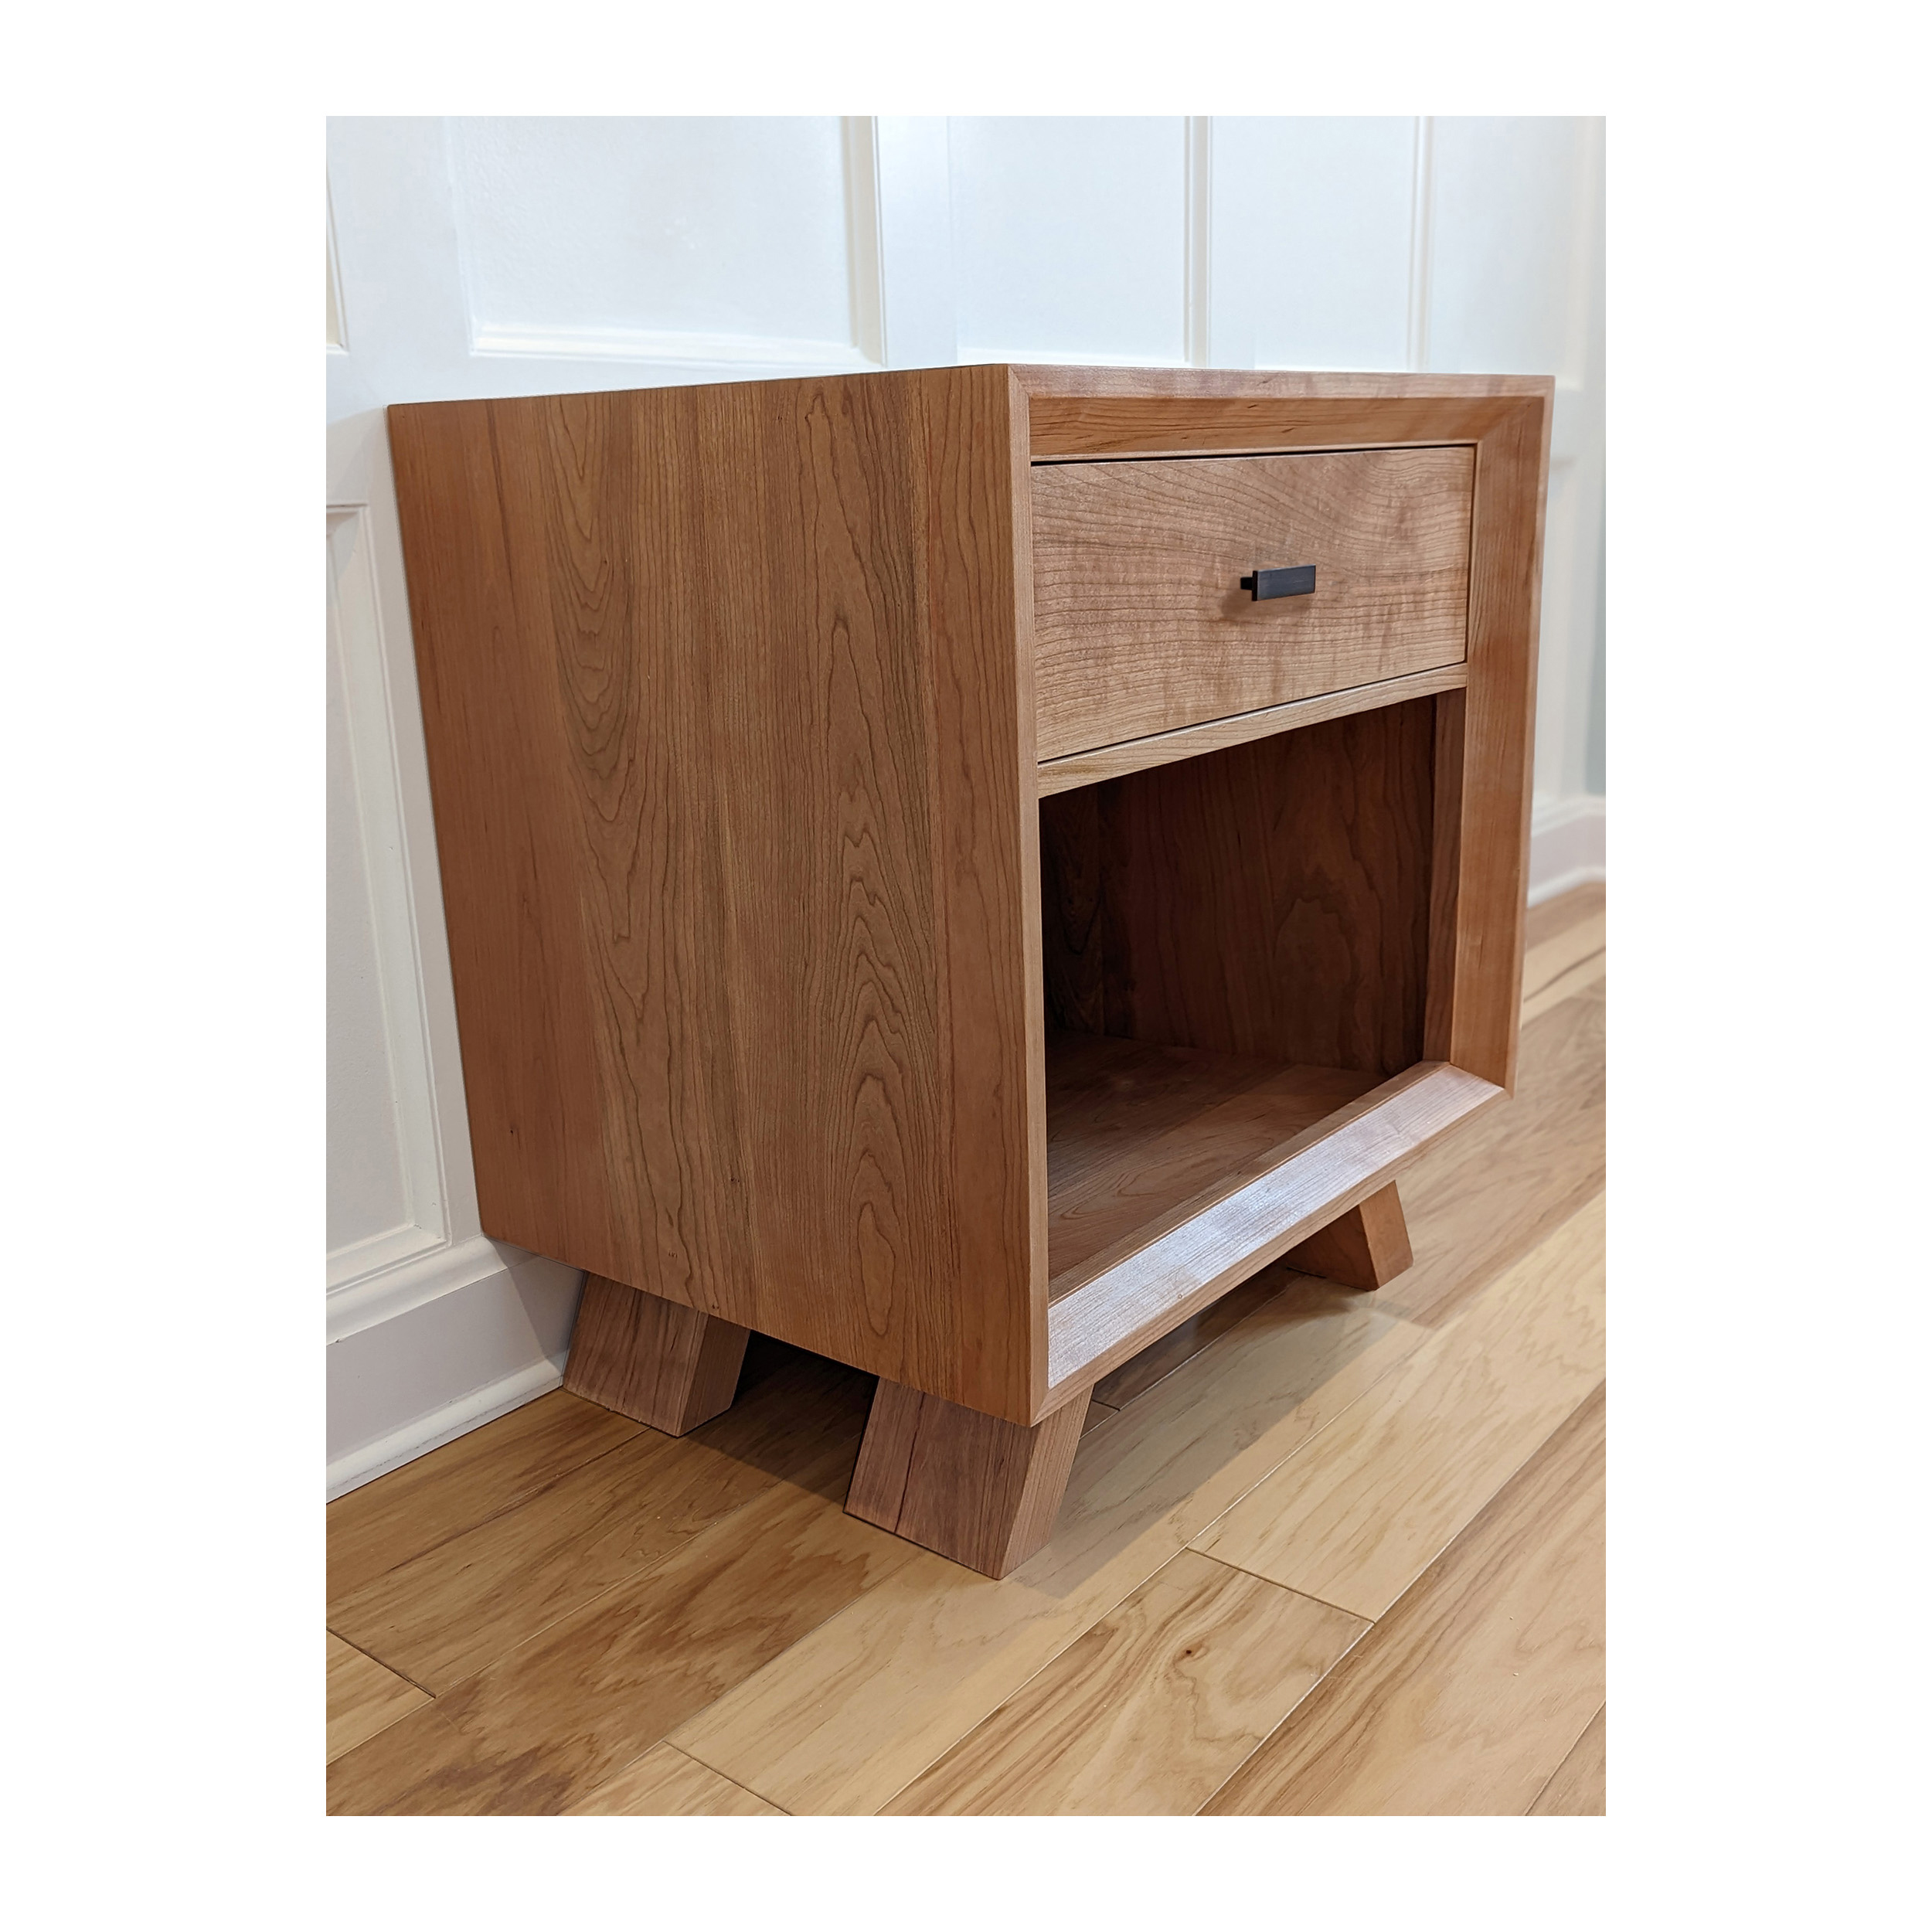 One Drawer Nightstand Made In Solid Cherry Wood With A Scandinavian Design--Made By 57NorthPlank Tailored Modern Furniture